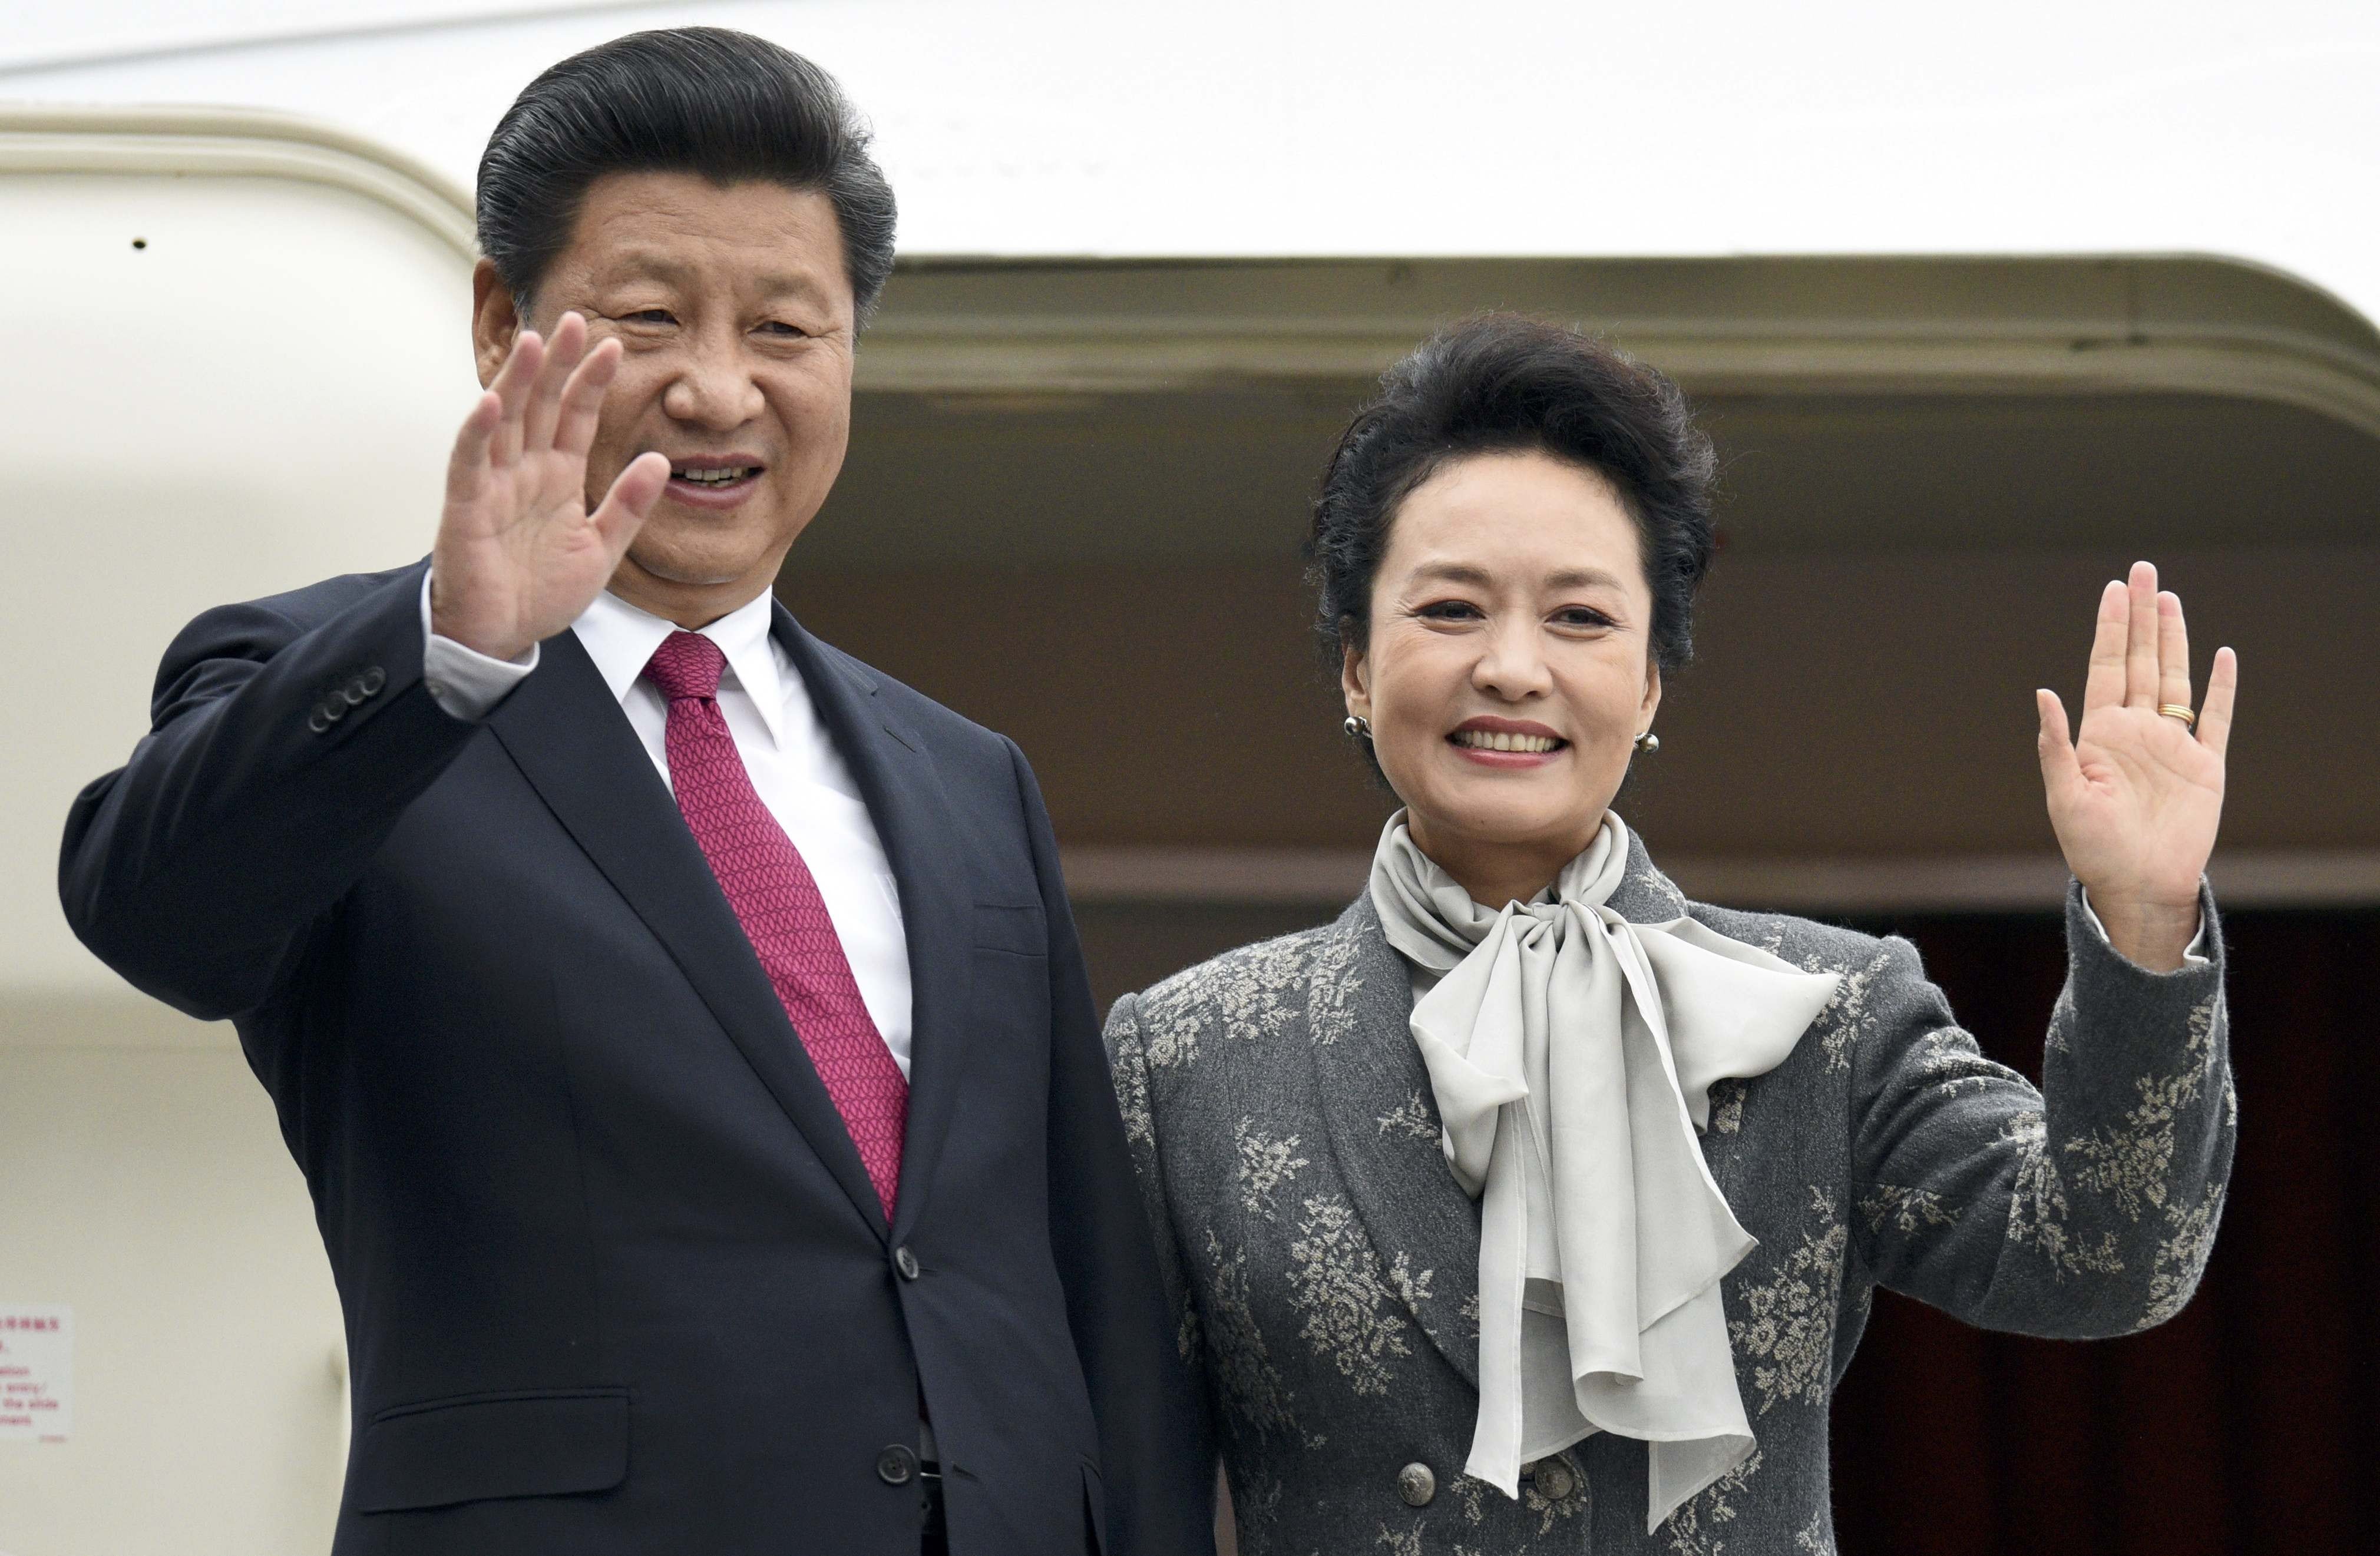 Xi Mingze Biography Age And Other Facts About Xi Jinping